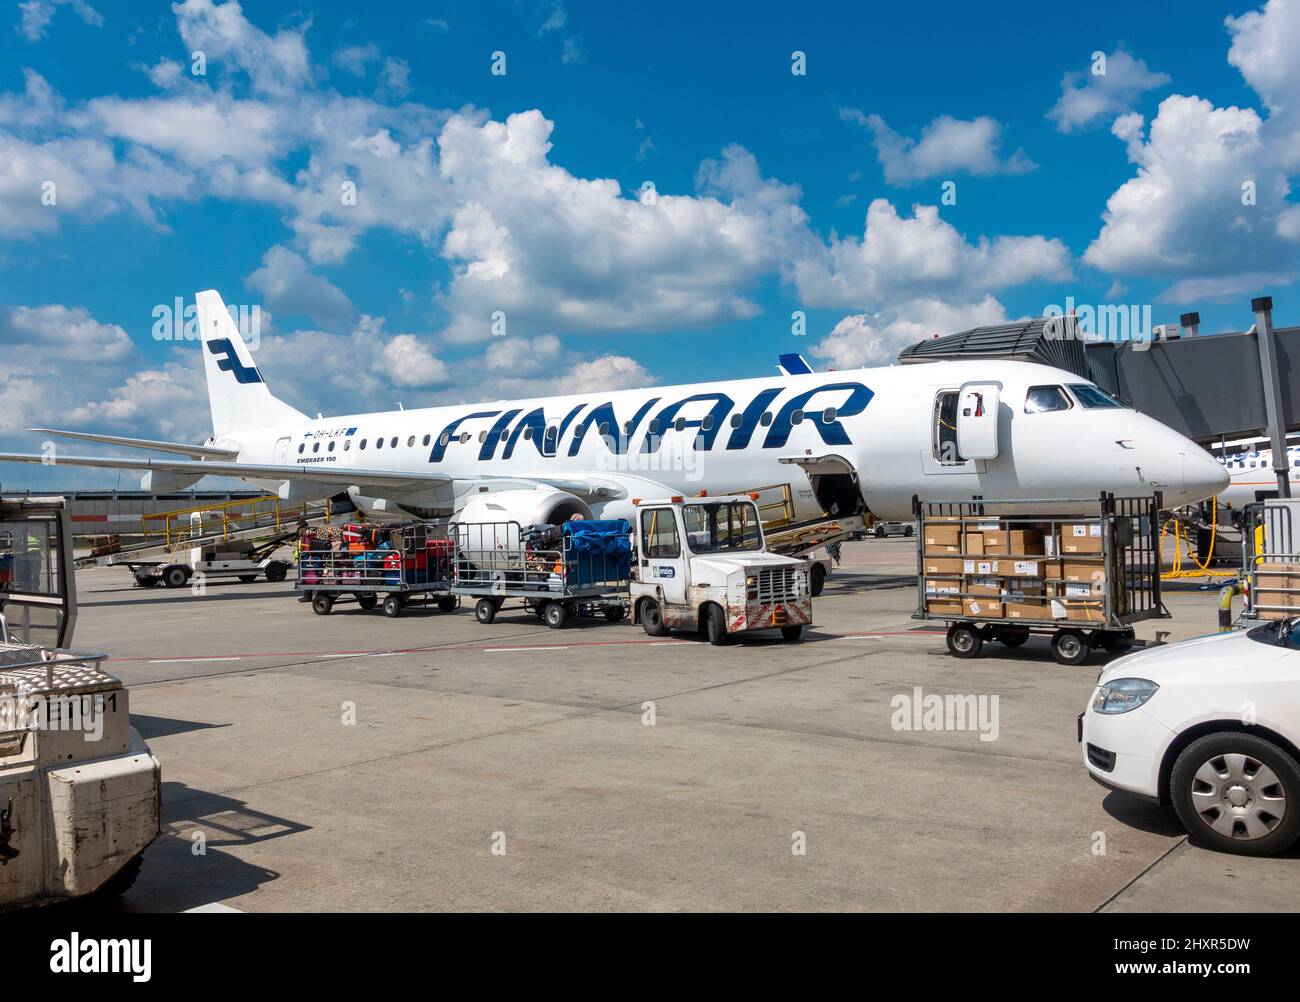 Finnair airlines aeroplane been loaded with luggage at Gatwick airport in England, UK Stock Photo